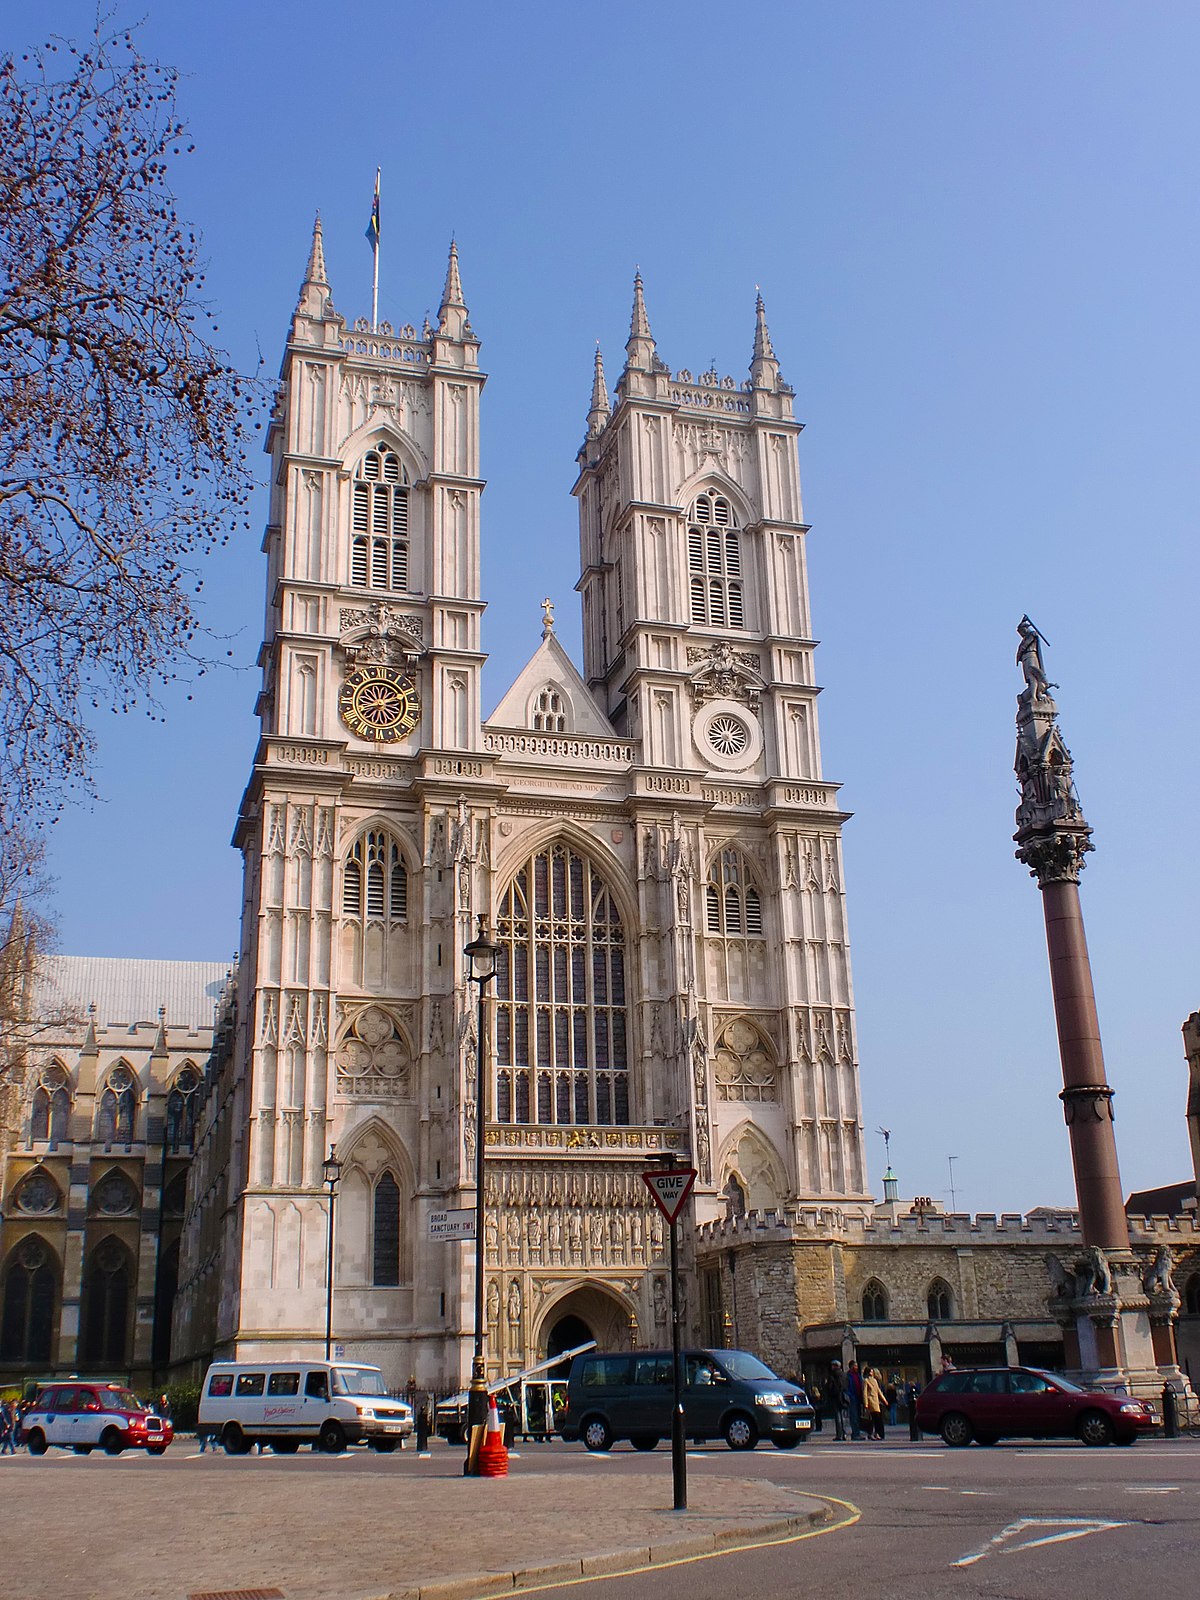 Westminster abbey photo